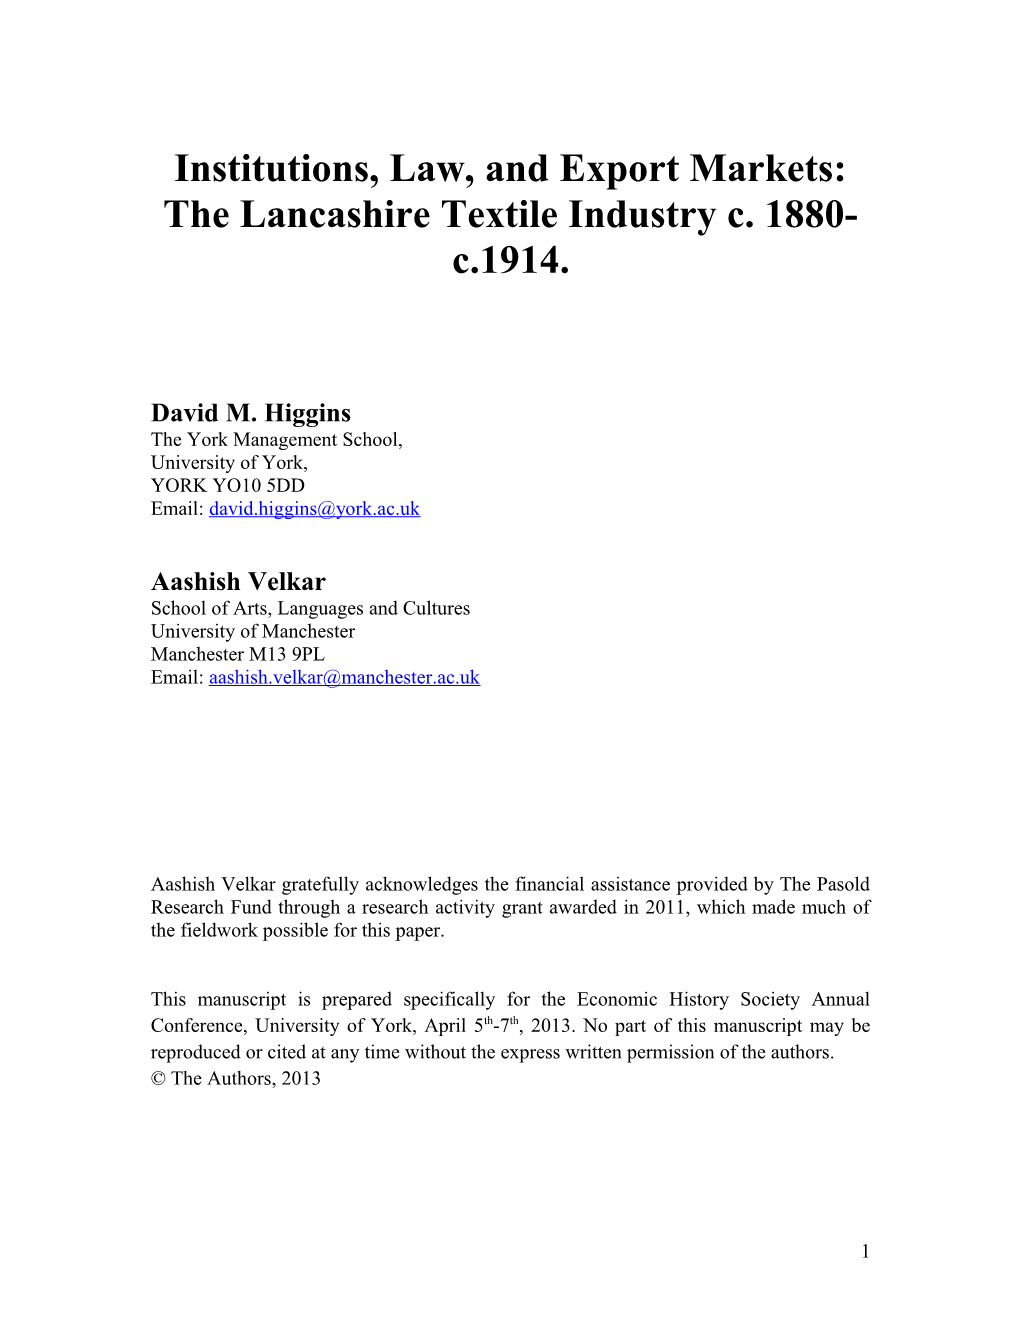 Institutions, Law, and Industrial Performance: the Lancashire Textile Industry C